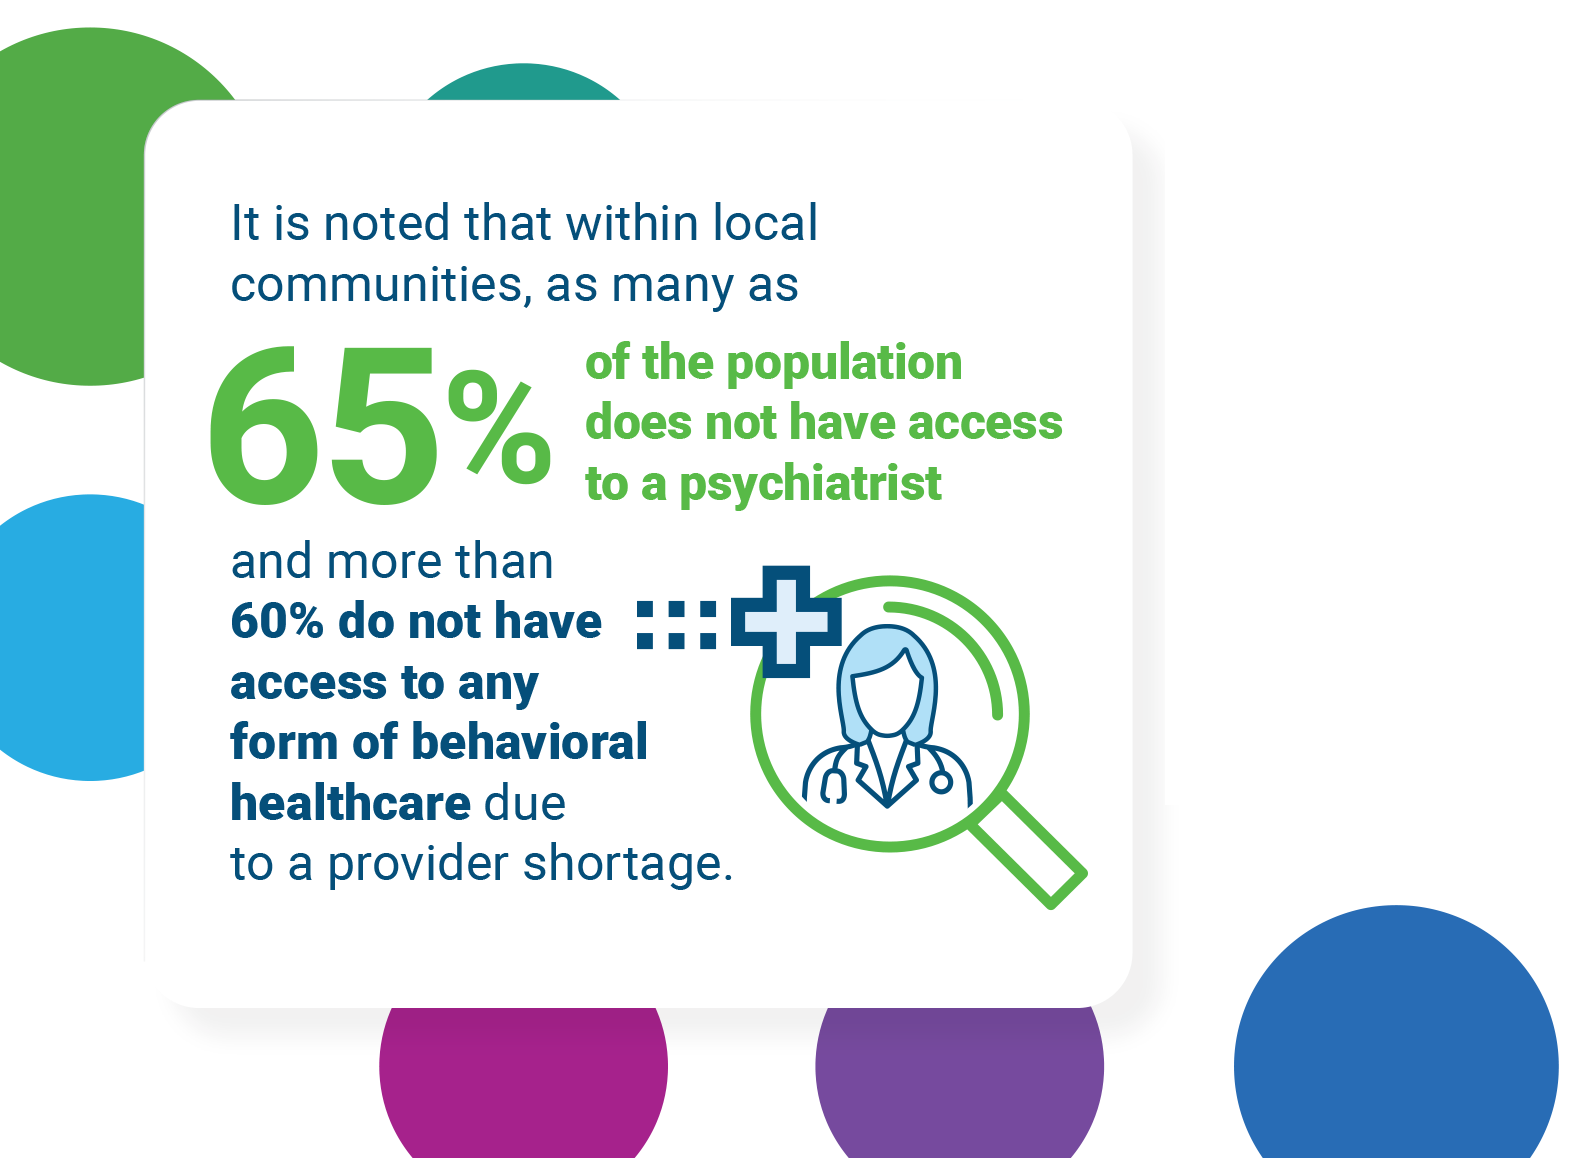 It is noted that within local communities, as many as 65% of the population do not have access to this kind of specialist and more than 60% do not have access to any form of behavioral healthcare due to a provider shortage.